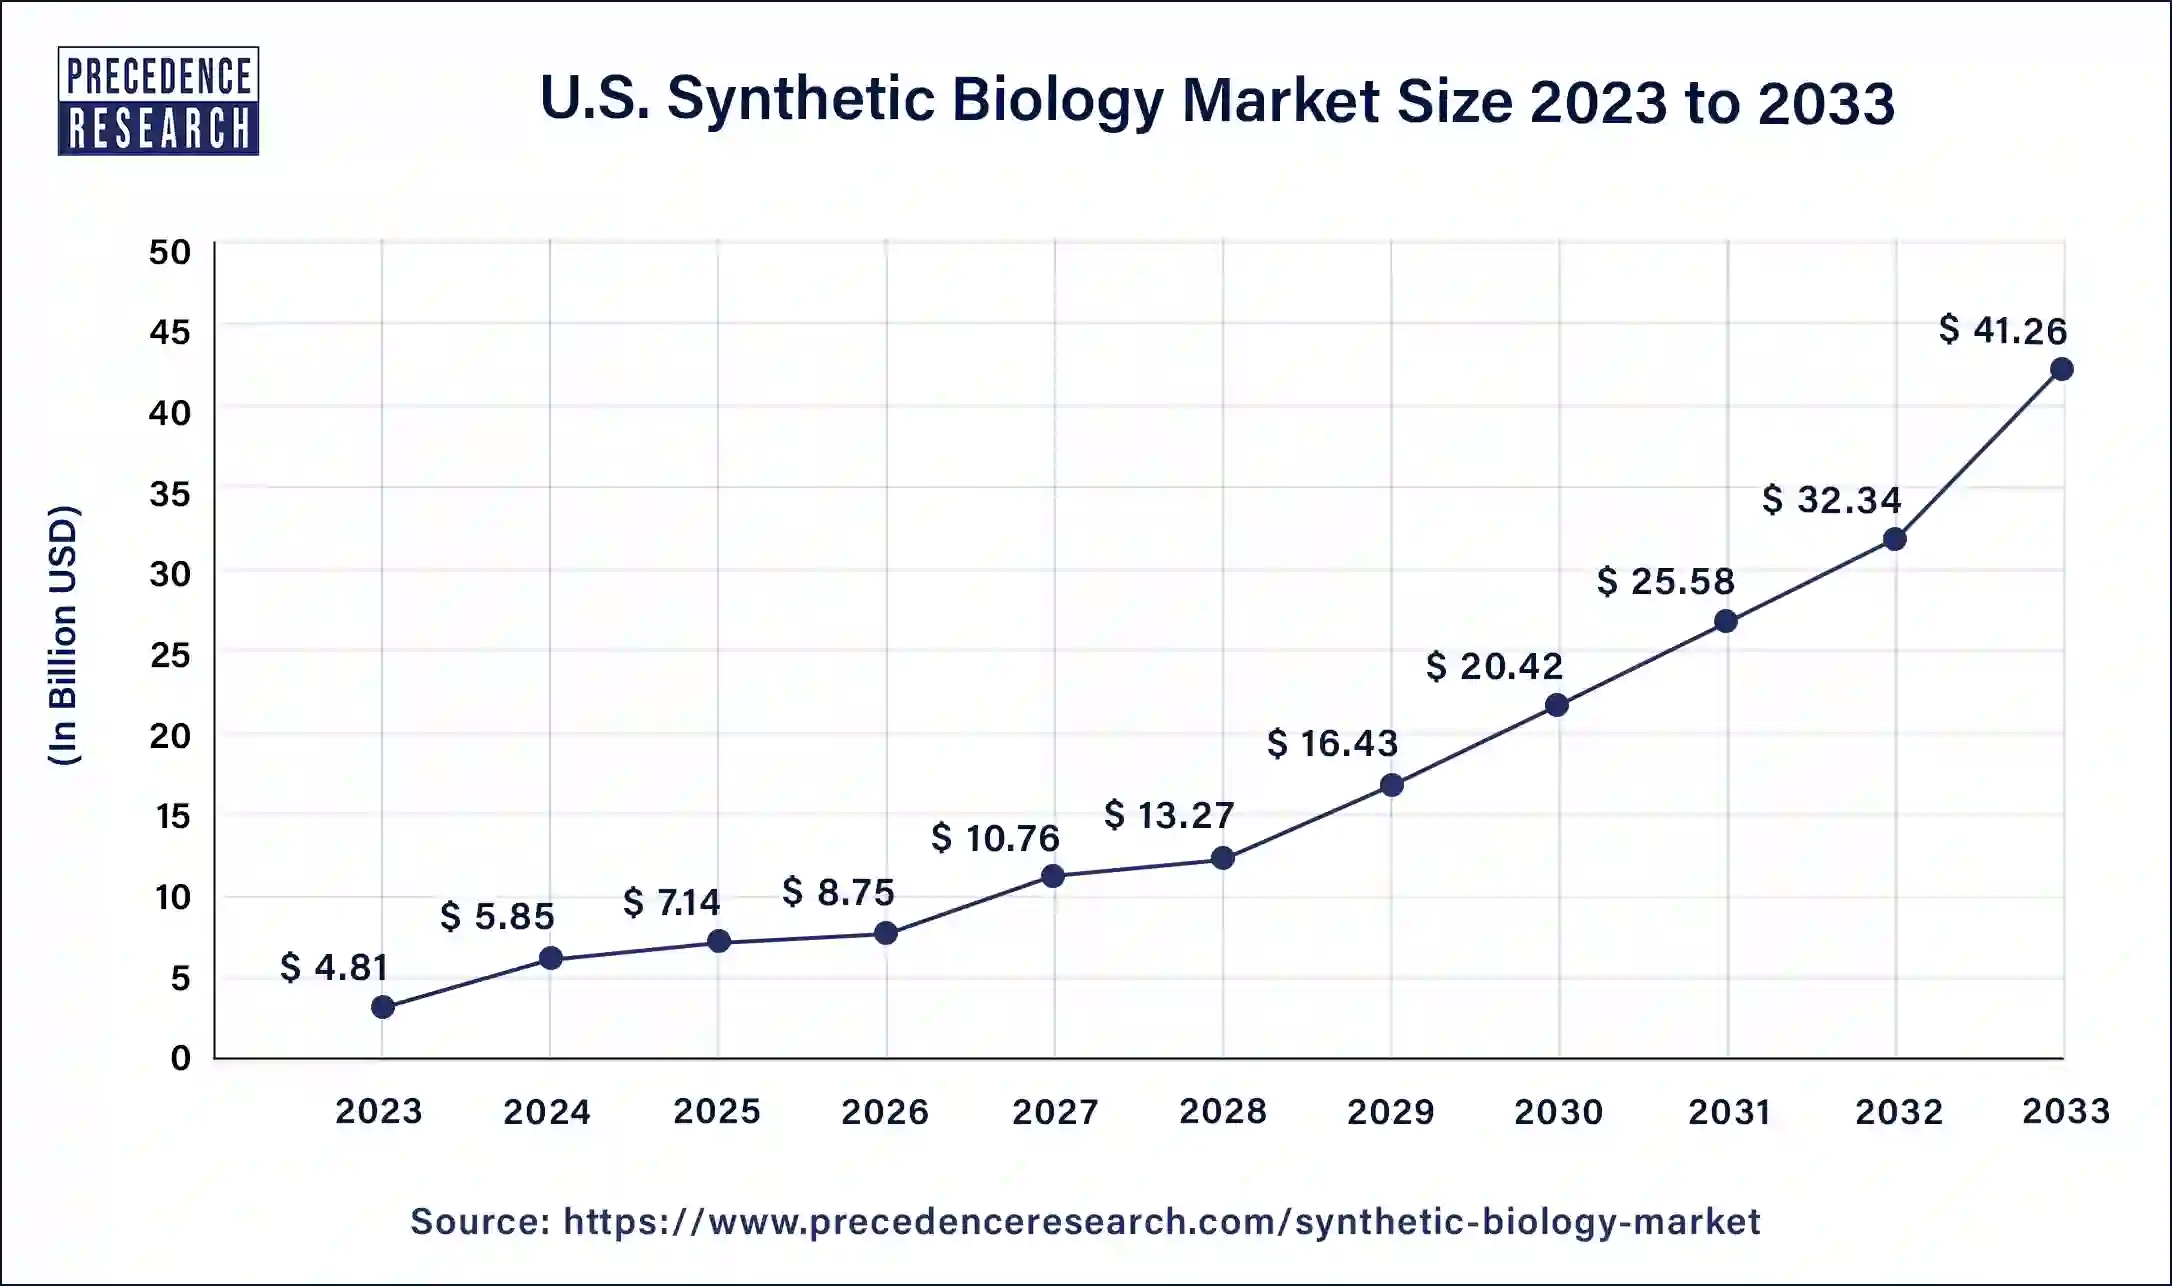 U.S. Synthetic Biology Market Size 2024 to 2033